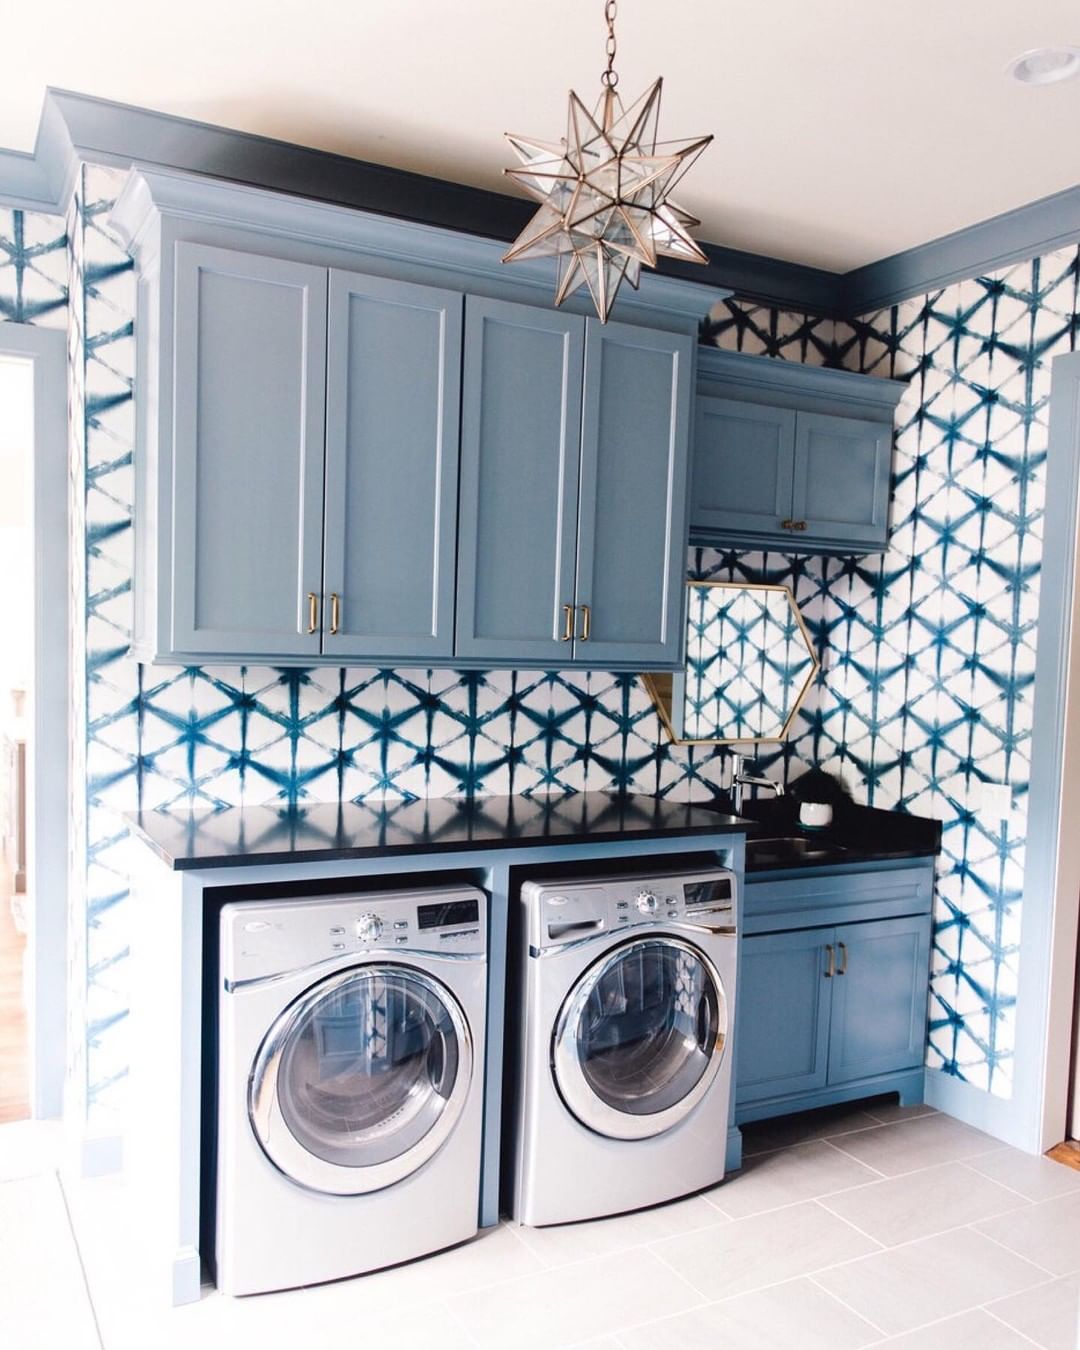  Geometric Patterns for a Modern Laundry Room